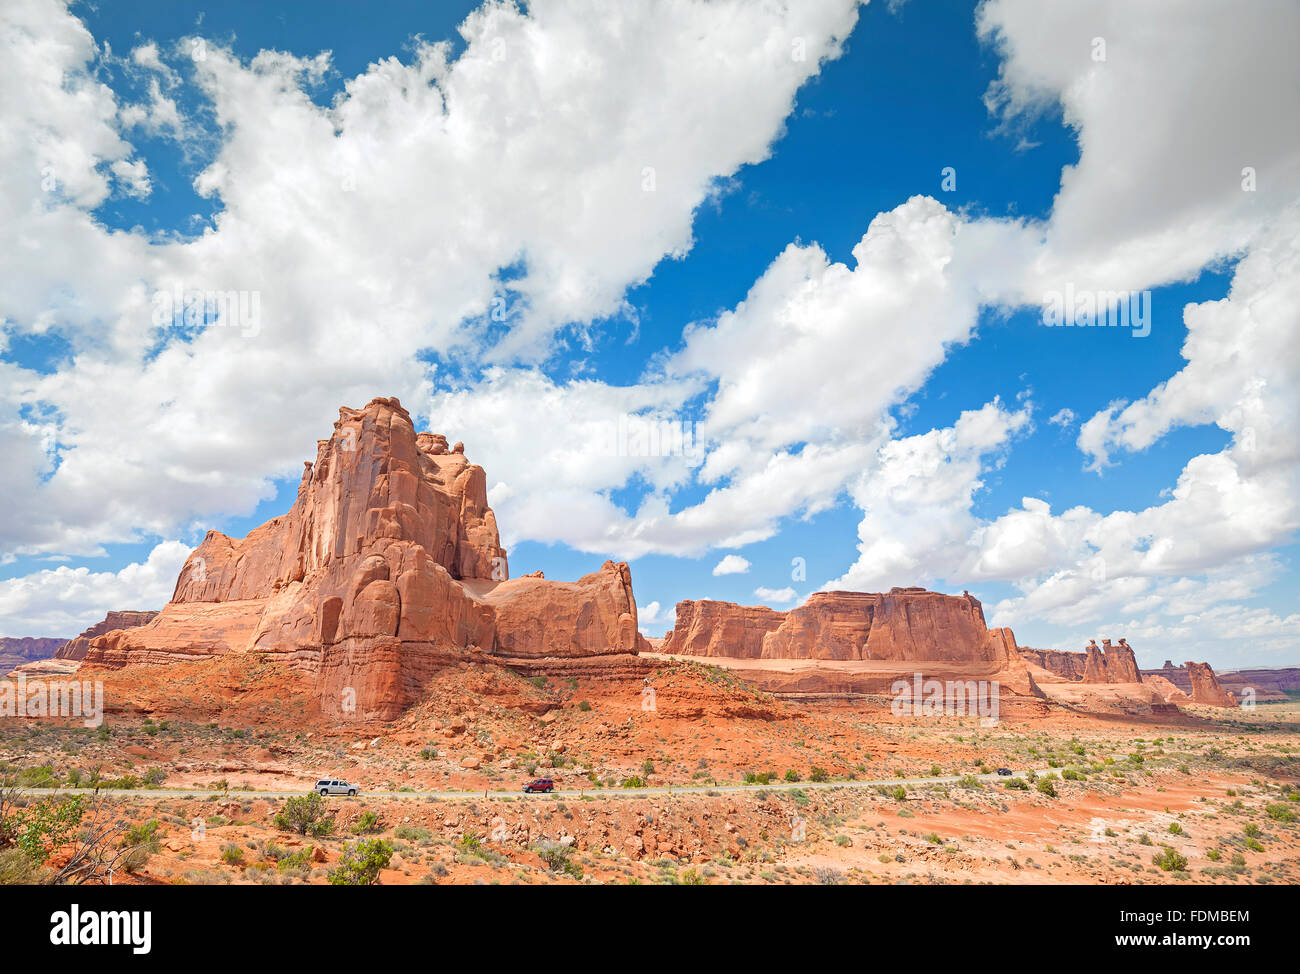 Rock formations in Canyonlands National Park, Utah, USA. Stock Photo